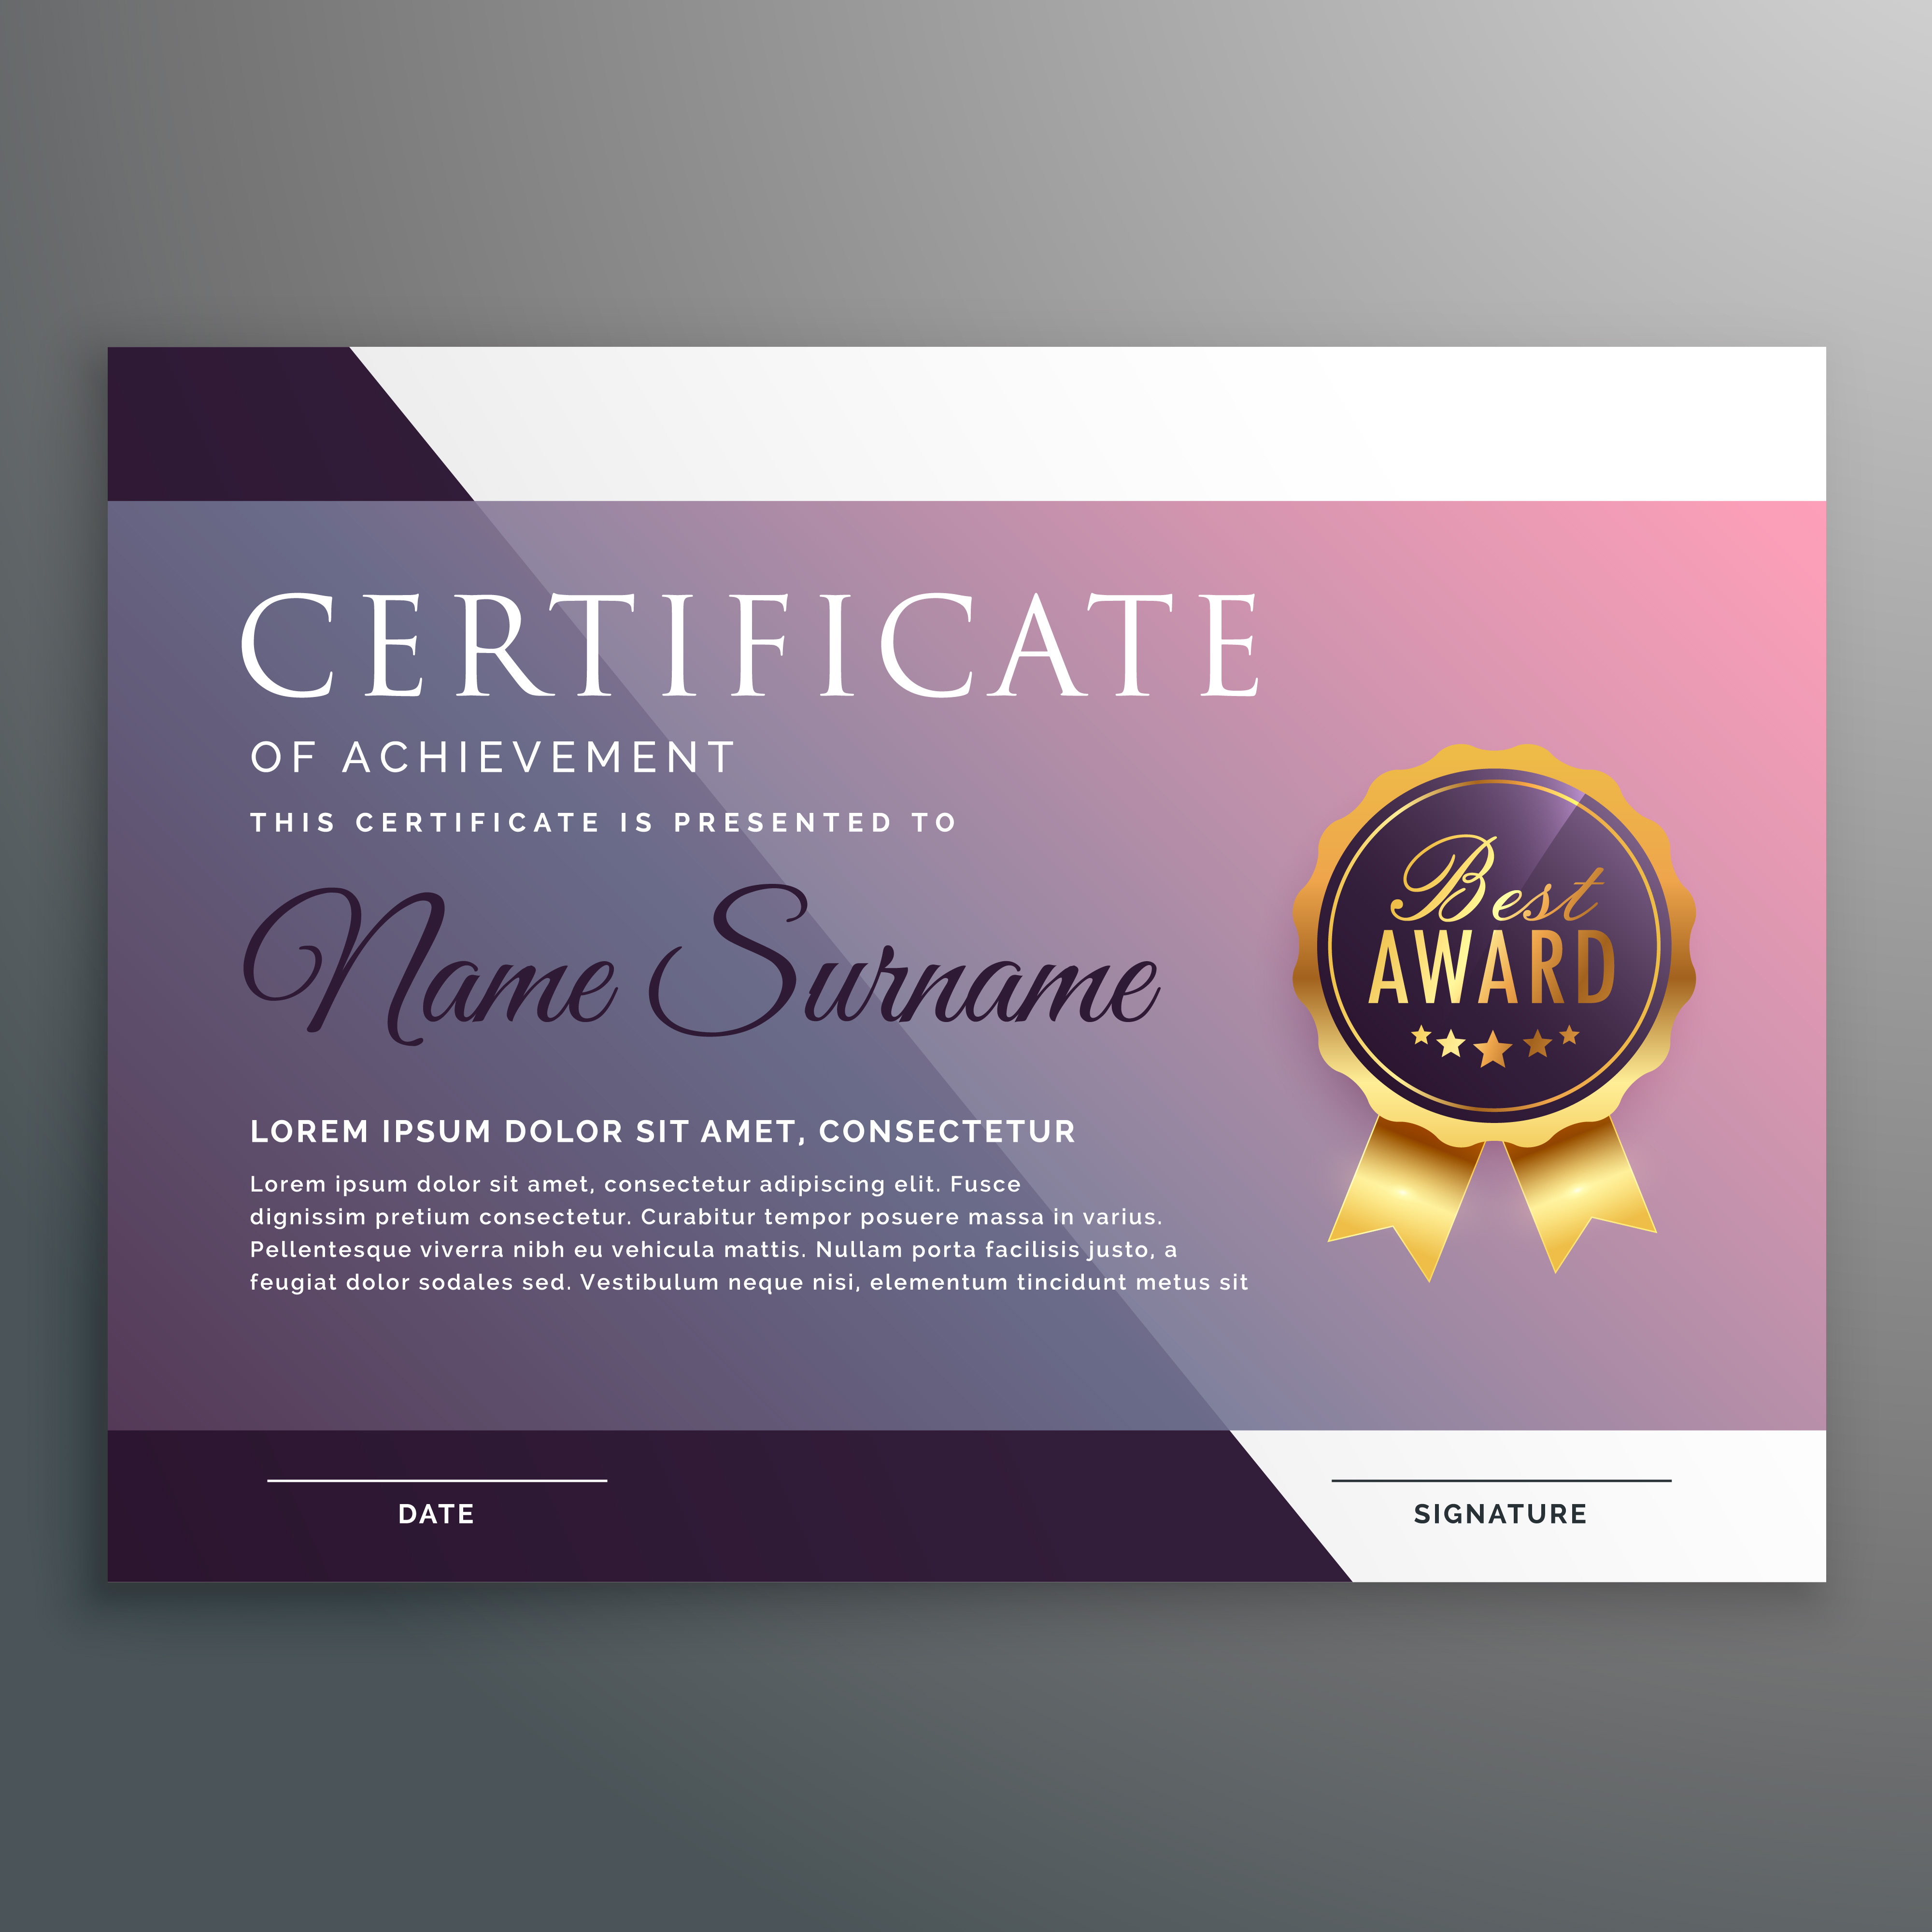 Download certificate template with award symbol - Download Free Vector Art, Stock Graphics & Images